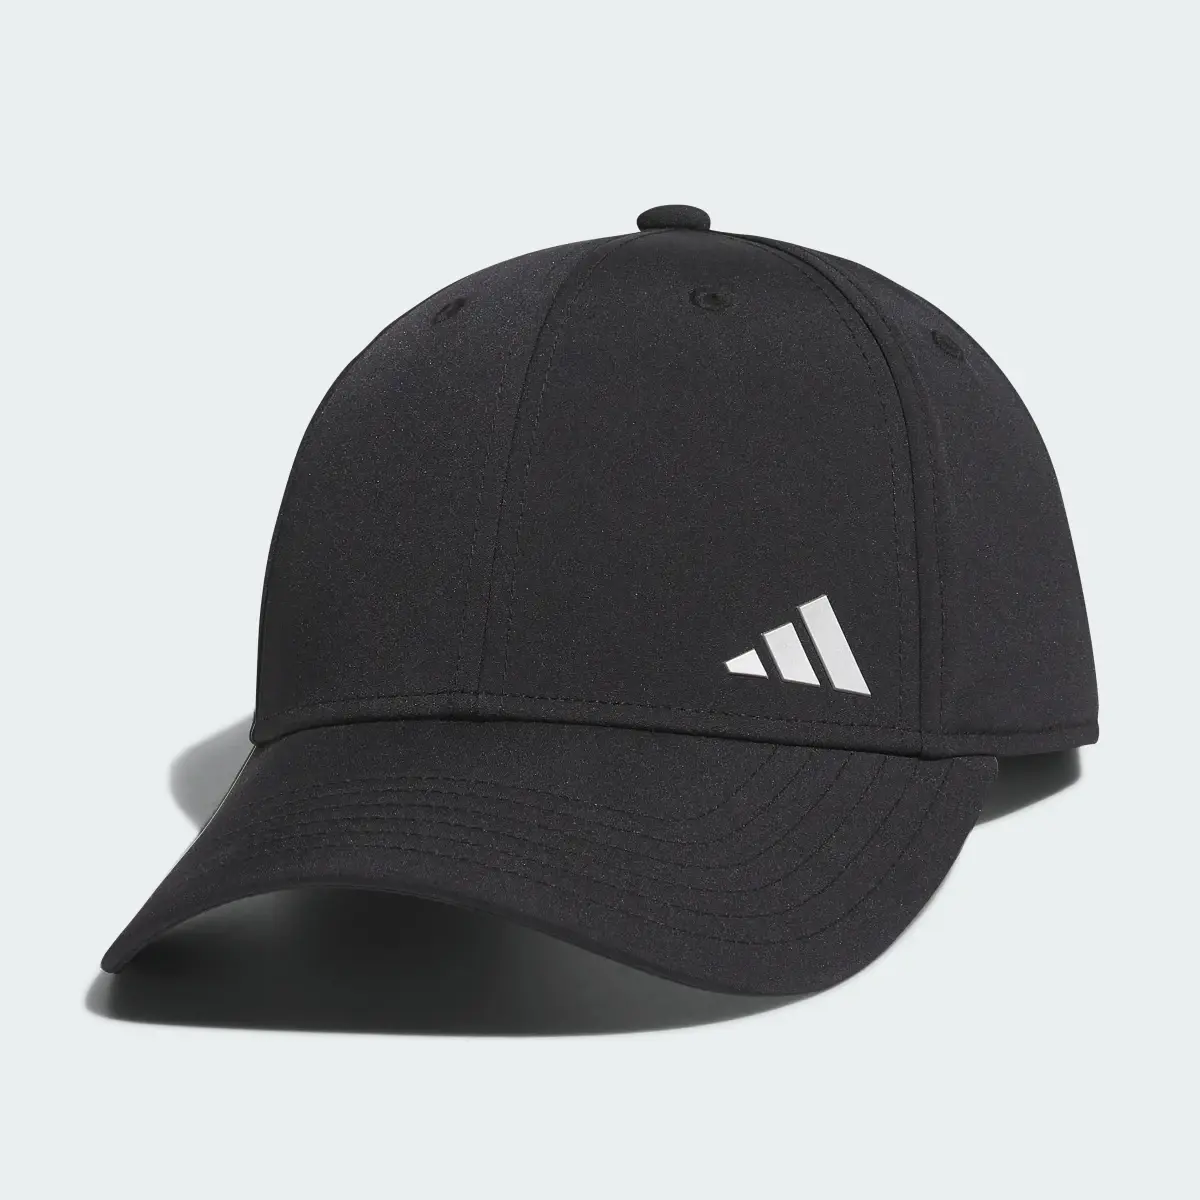 Adidas Backless 2 Hat. 3